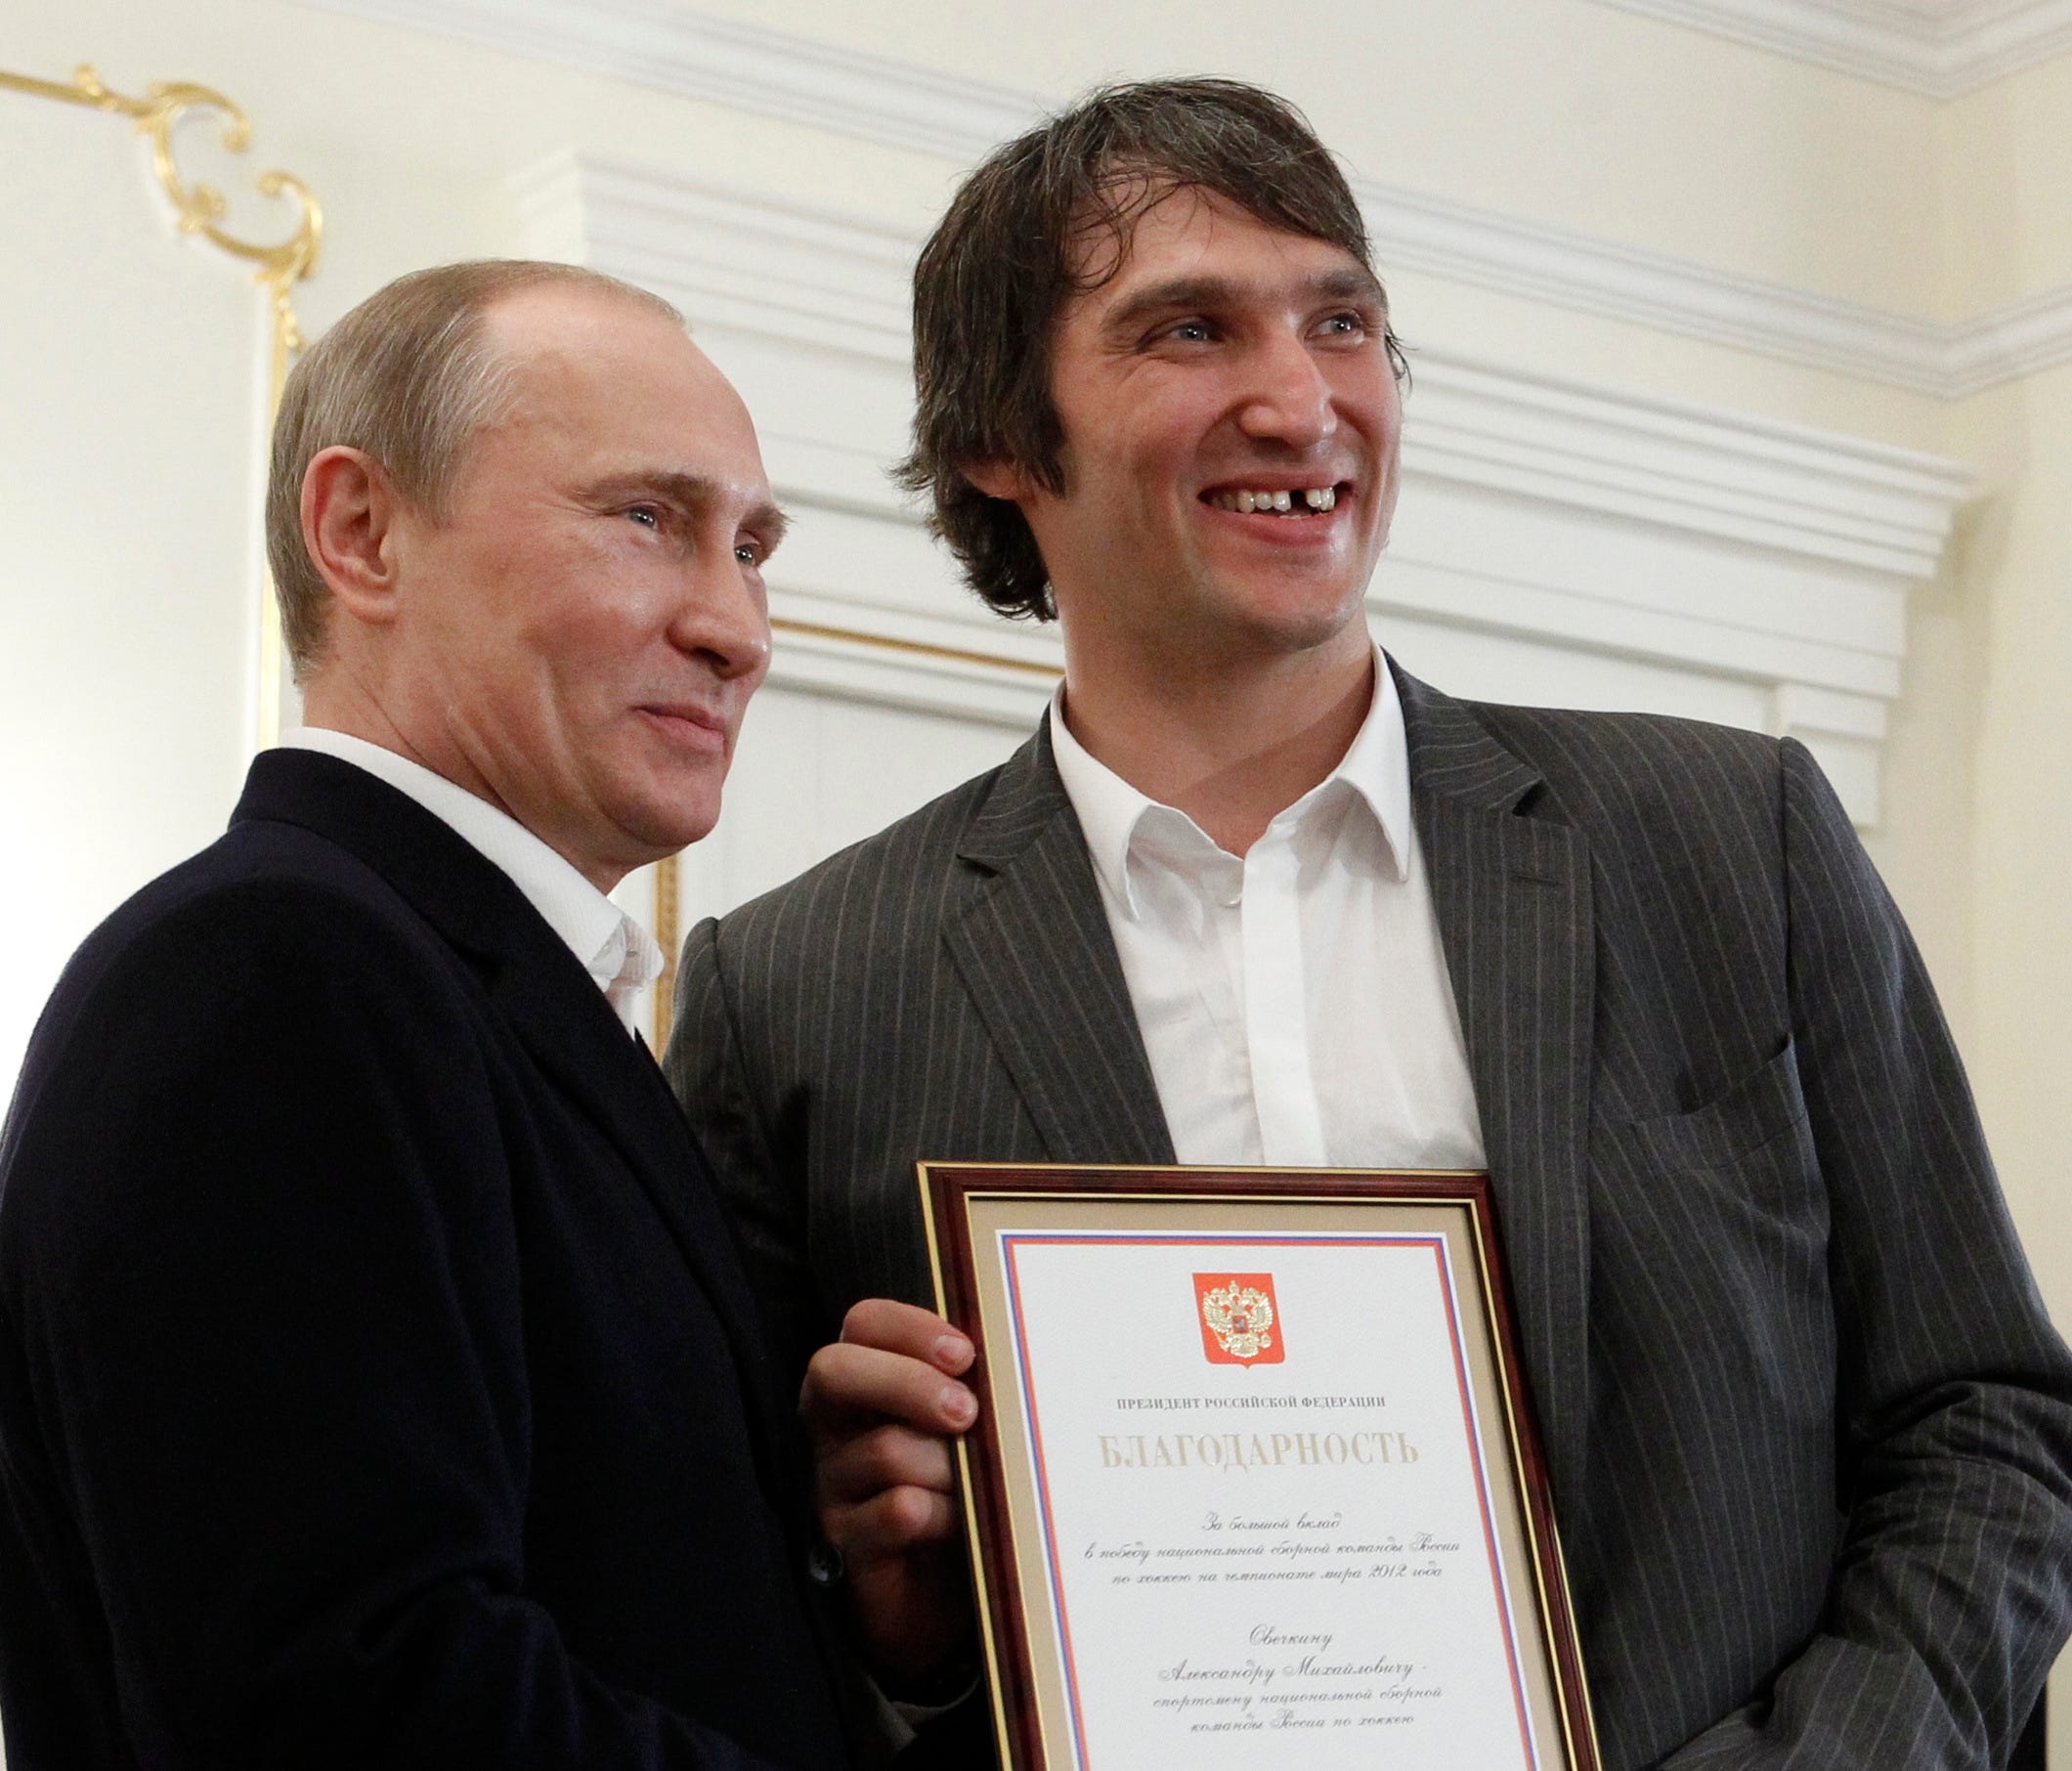 FILE - In this May 29, 2012, file photo, Russian national ice hockey team member Alexander Ovechkin, right, holds a certficate of recognition given to him by President Vladimir Putin, left, in the Novo-Ogaryovo residence outside Moscow. Washington Ca